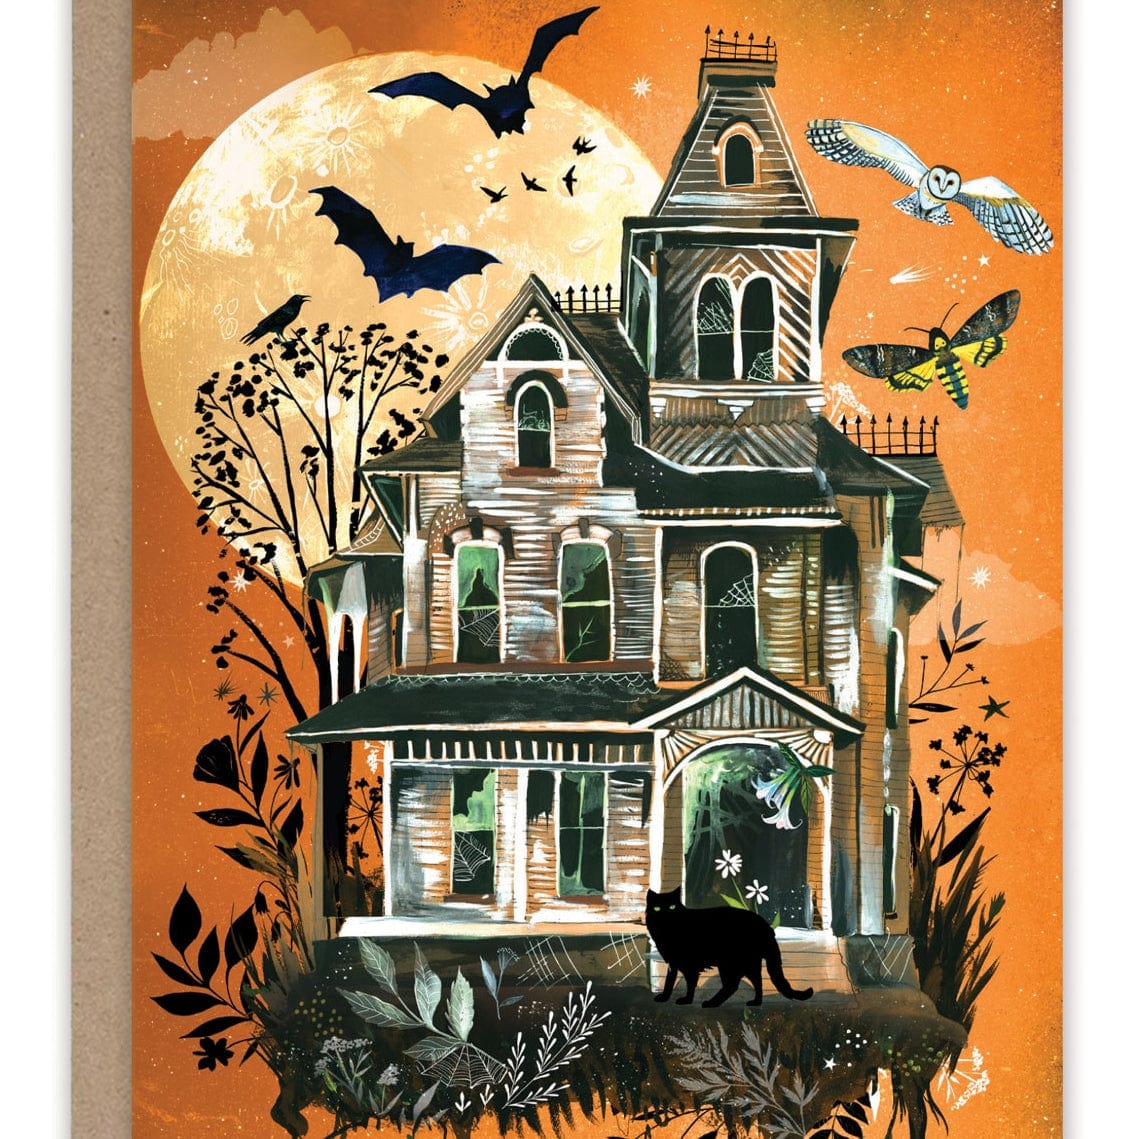 Biely &amp; Shoaf Haunted House Halloween Card